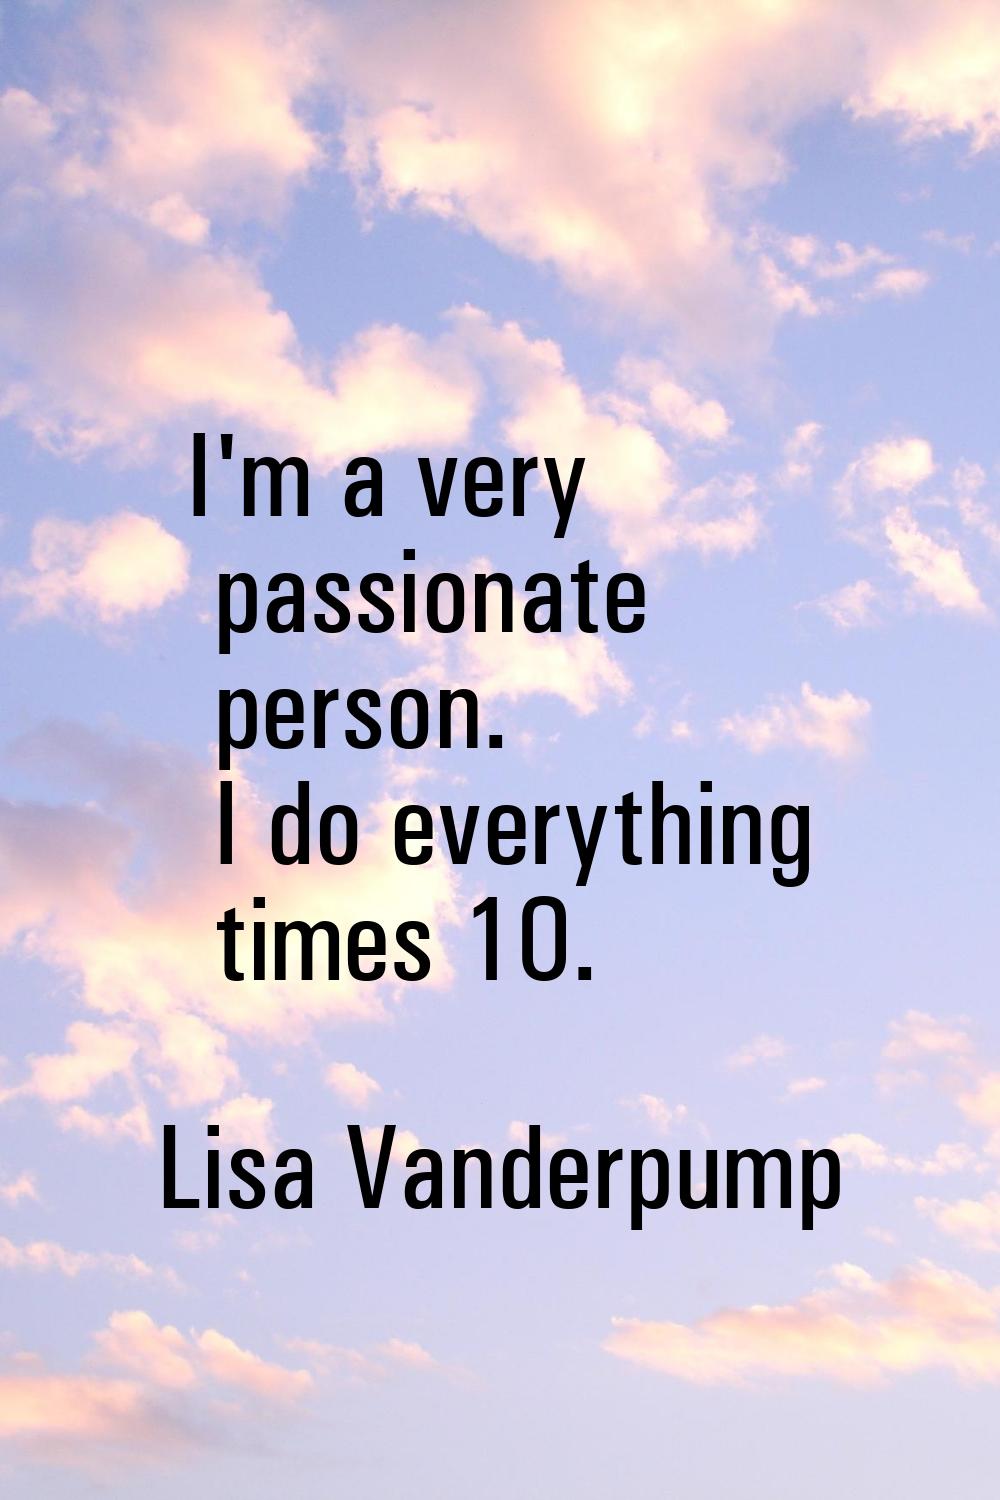 I'm a very passionate person. I do everything times 10.